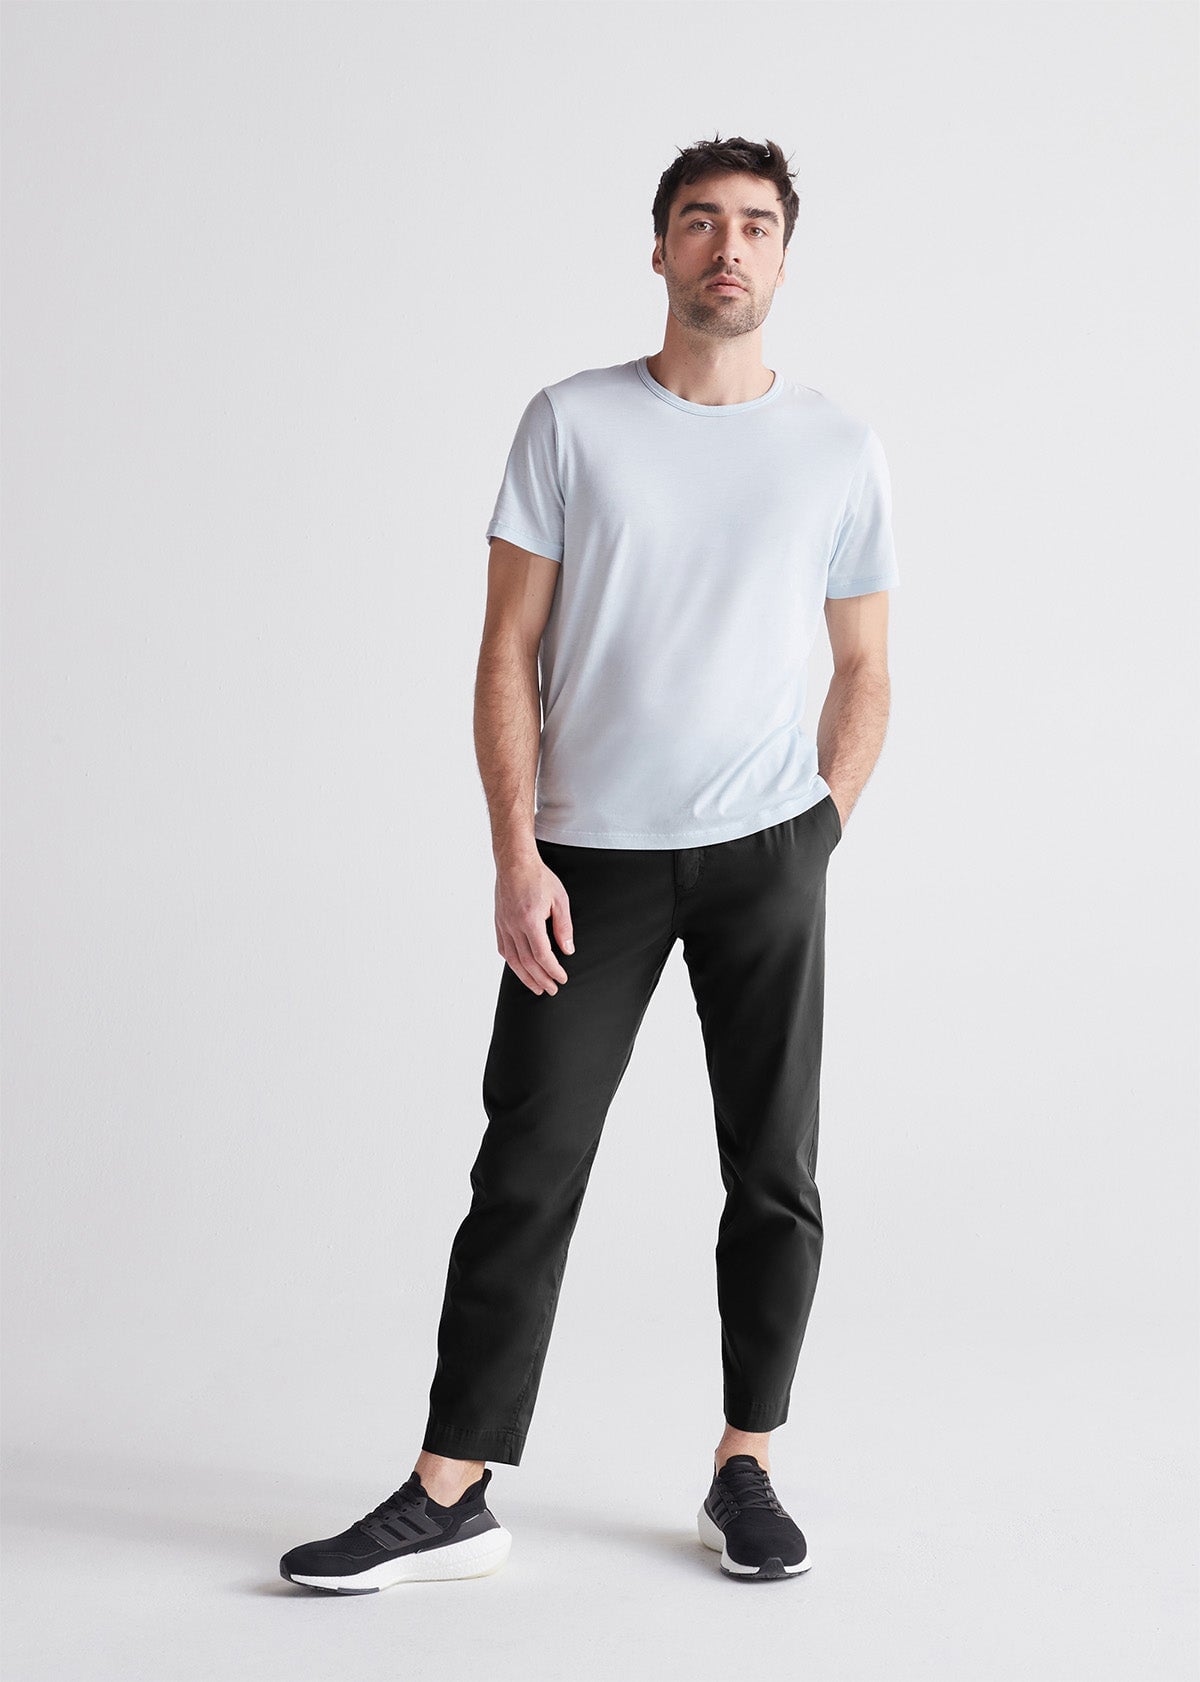 Mens Lightweight Pants for Men - Up to 75% off